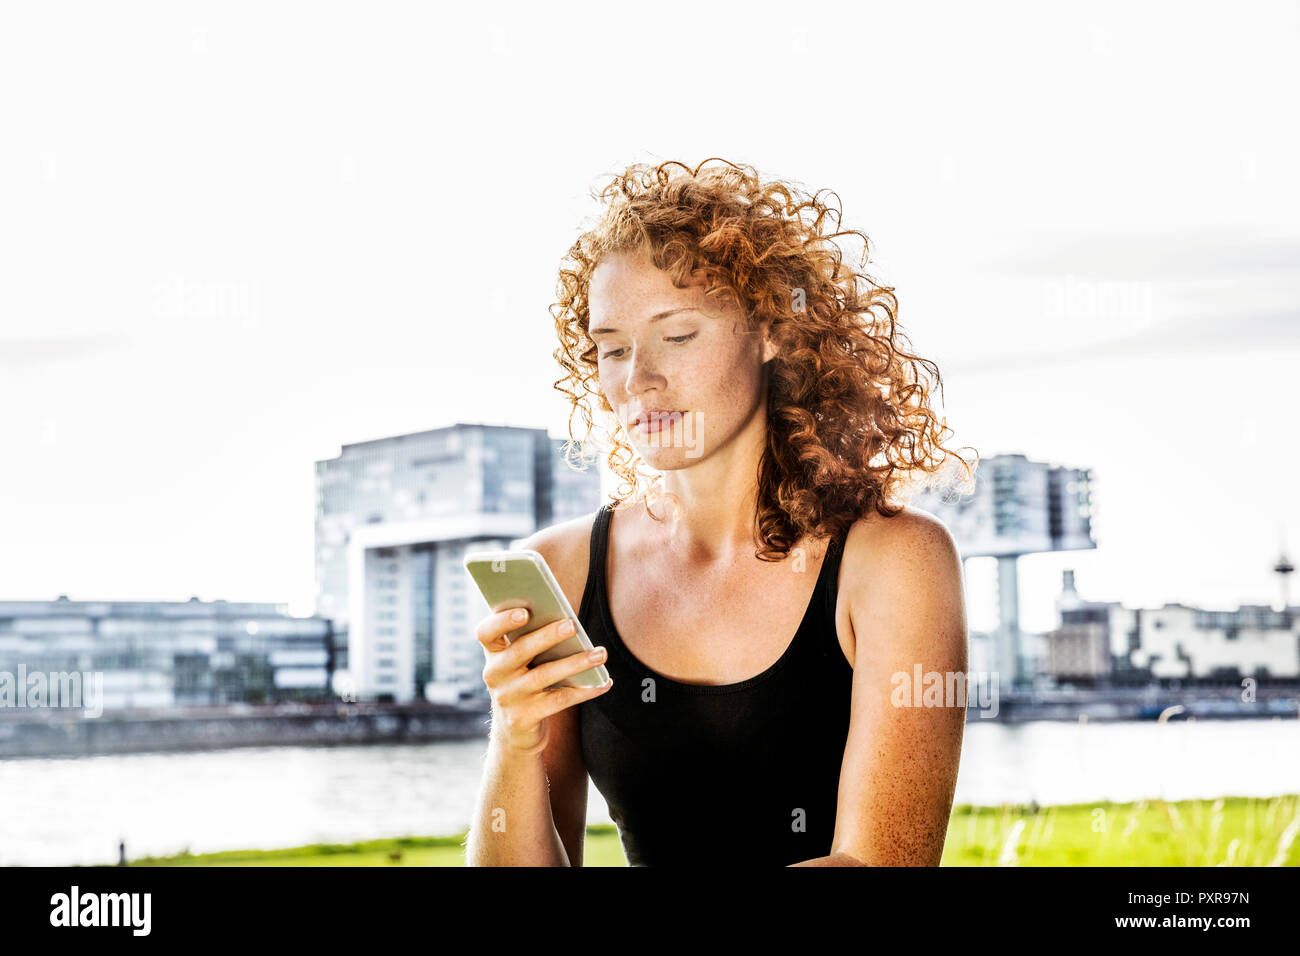 Germany, Cologne, portrait of serious young woman looking at cell phone Stock Photo